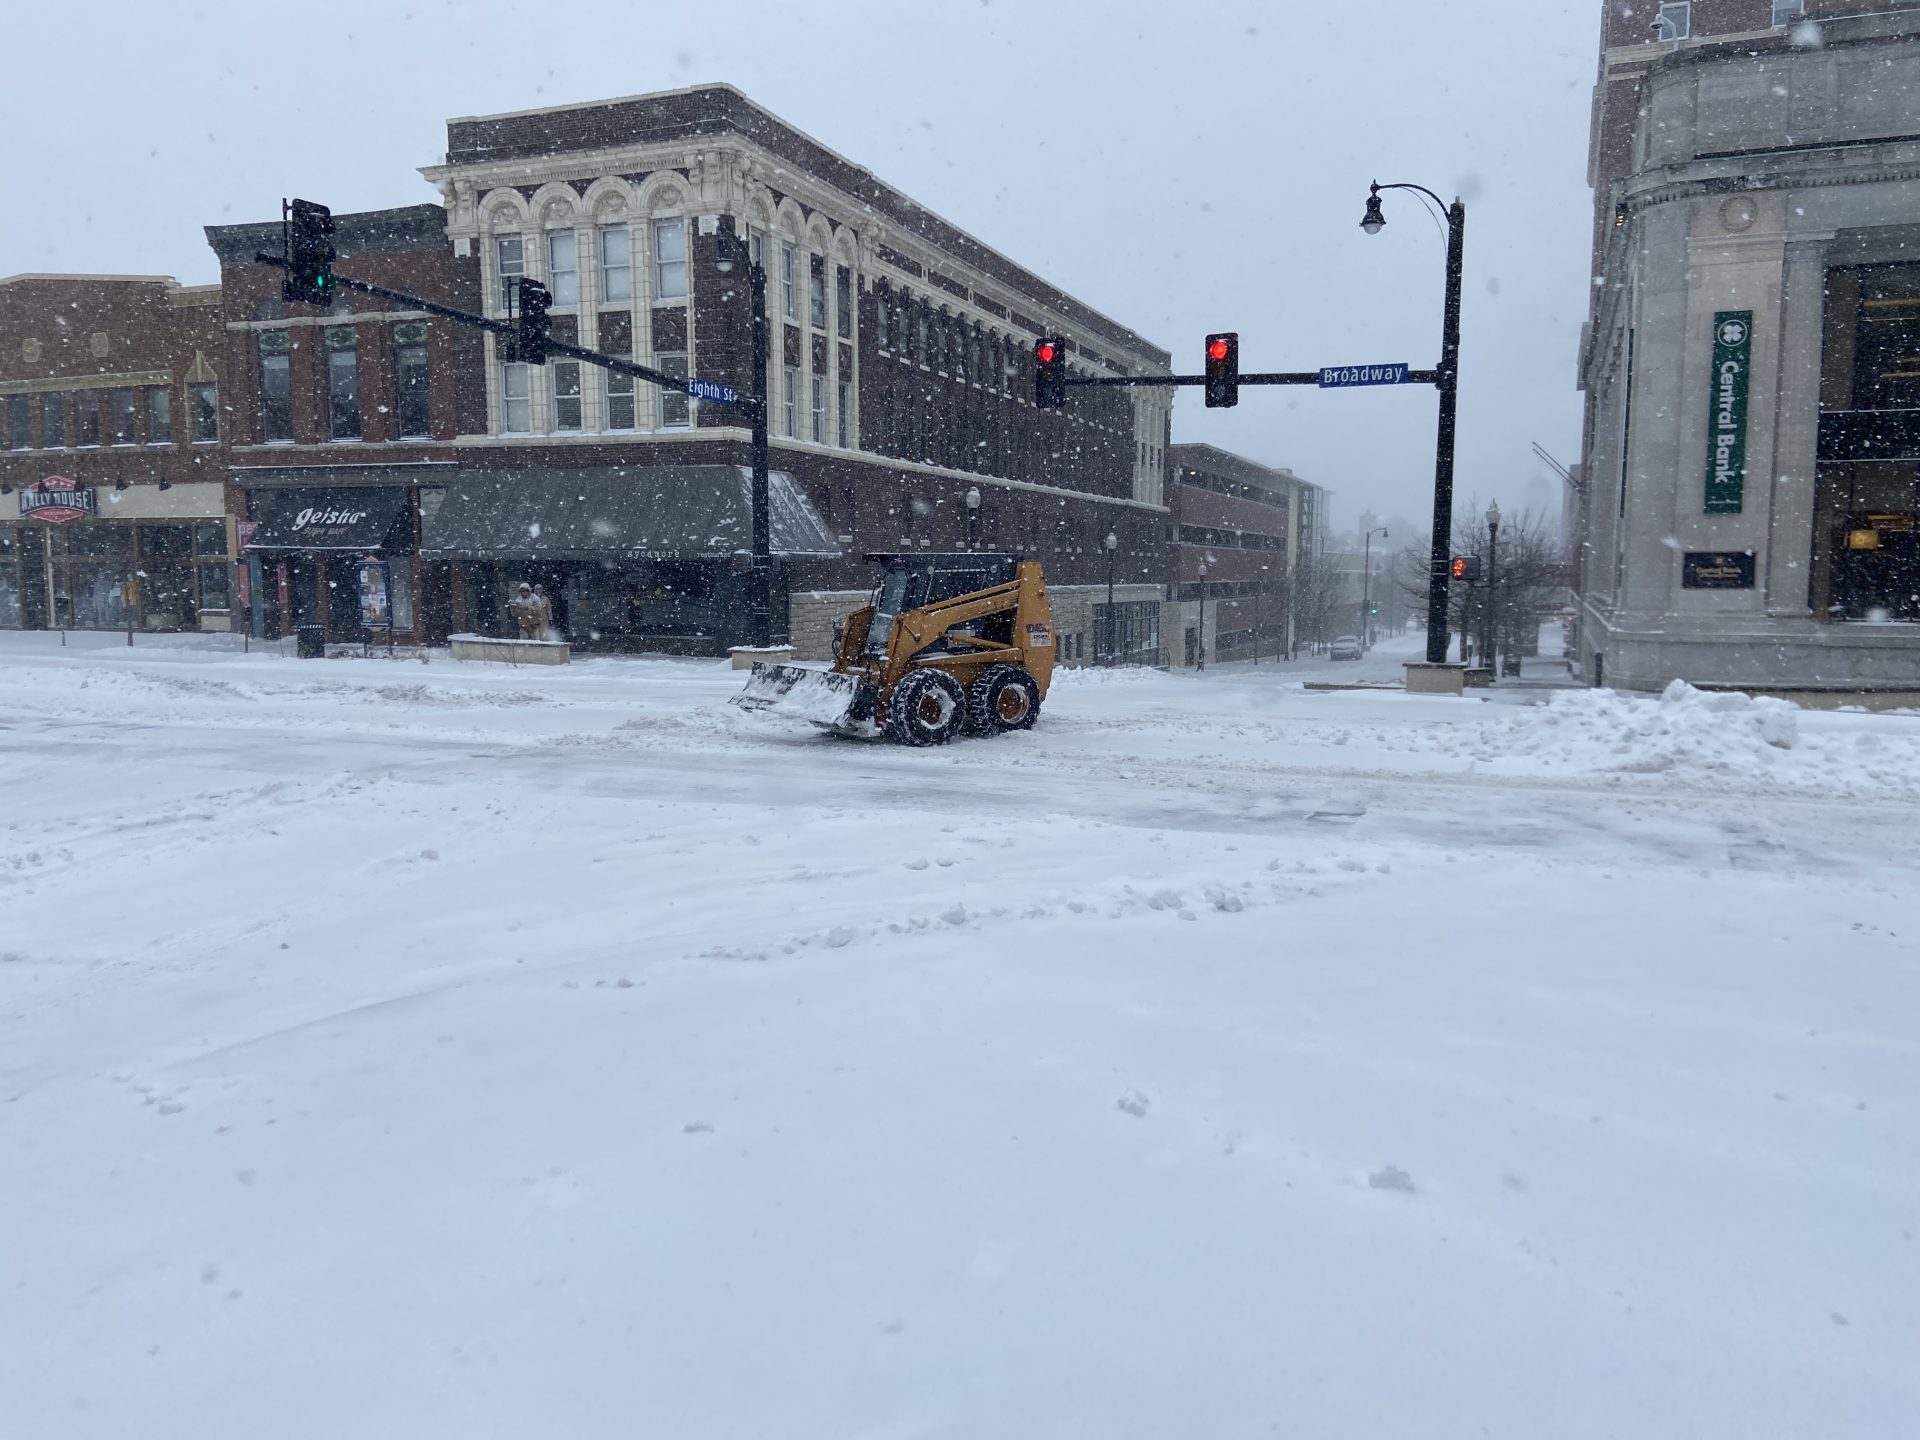 https://939theeagle.com/wp-content/uploads/2022/02/Columbia-Public-Works-snow.jpg